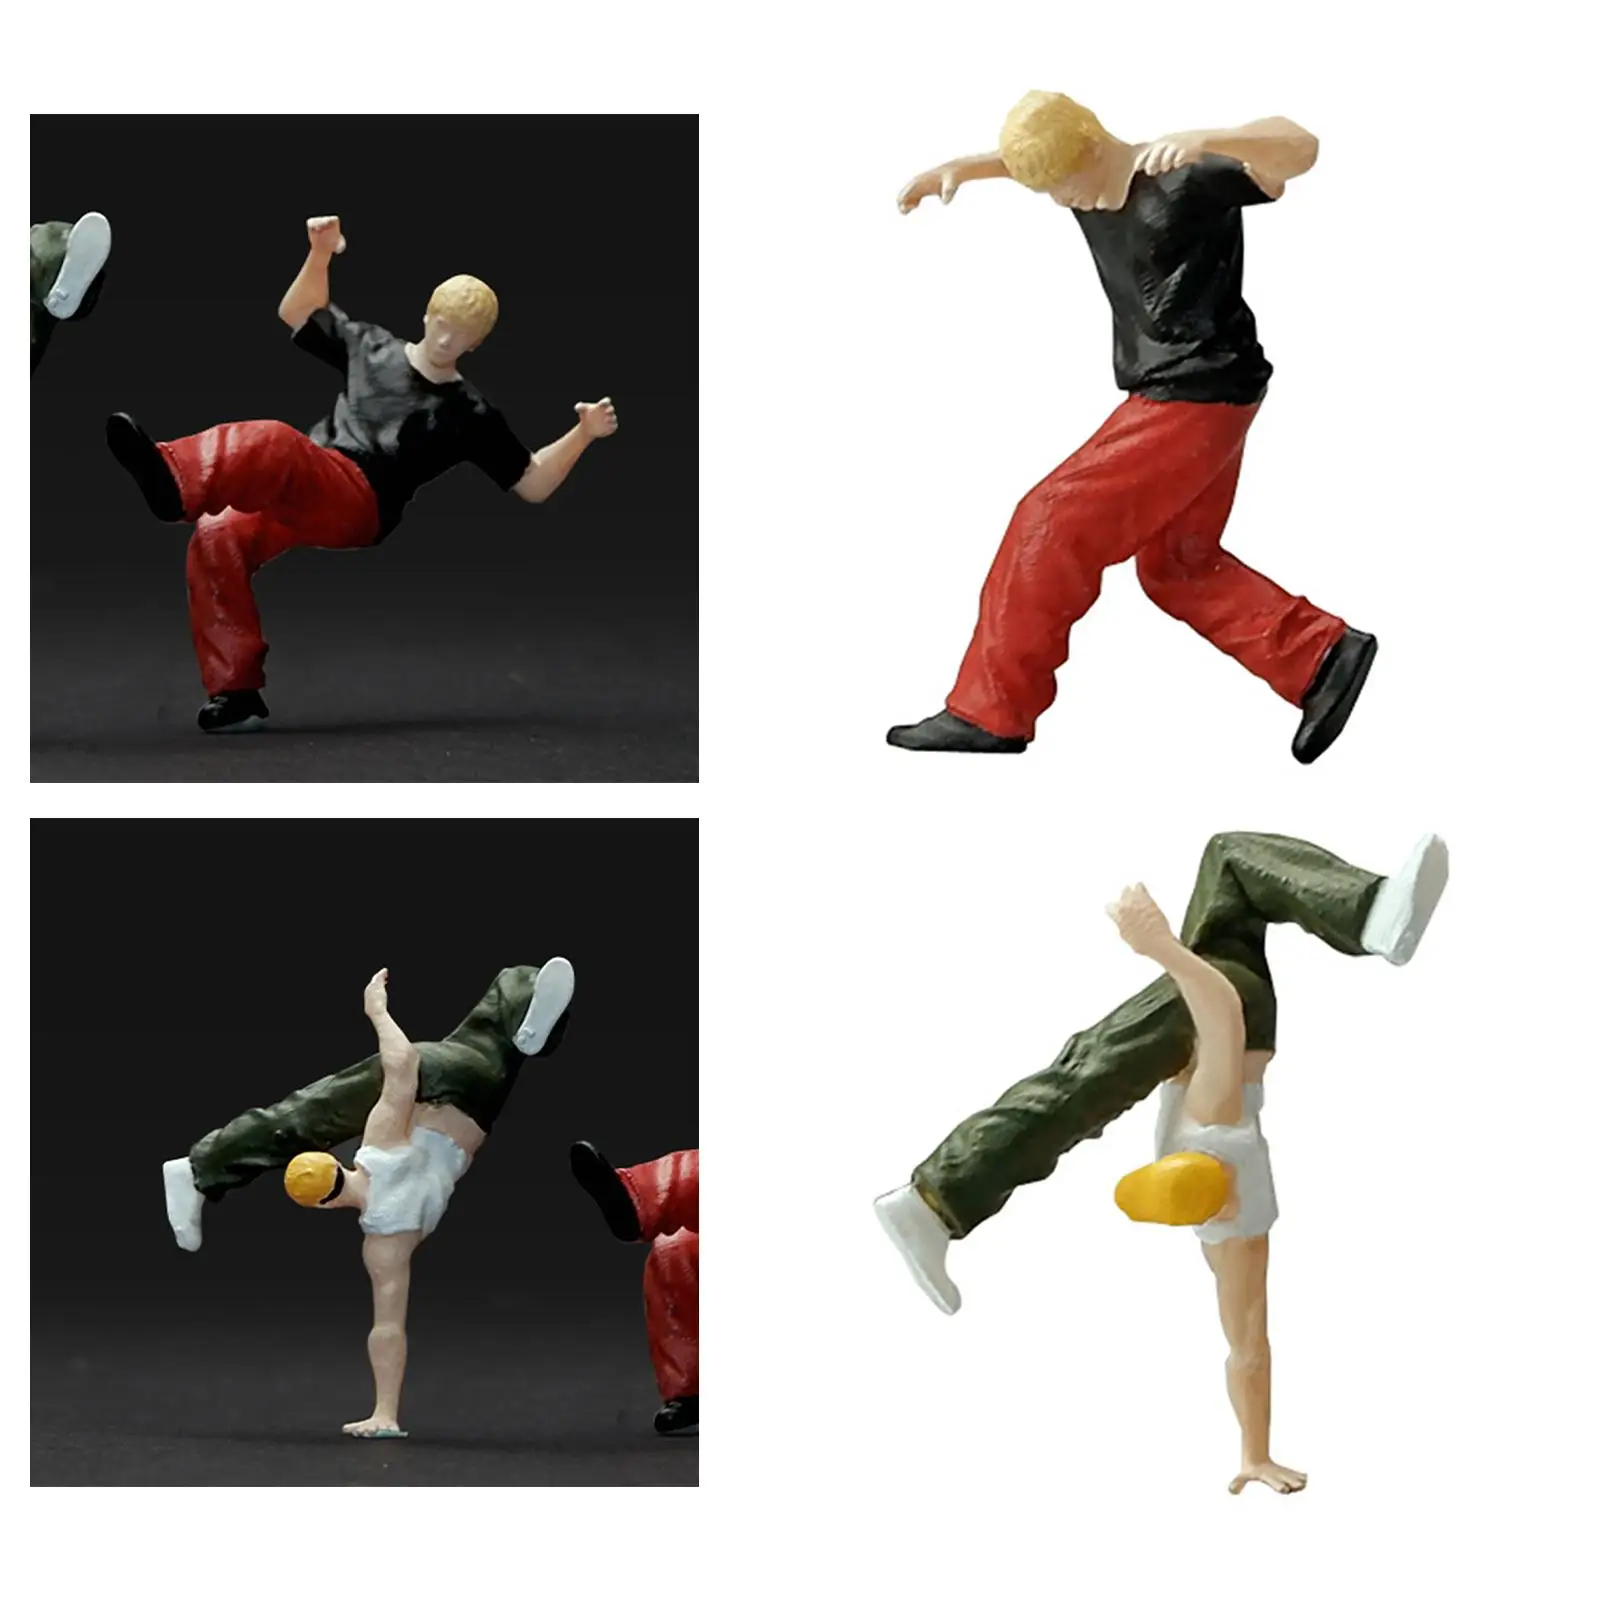 1/64 Scale Figure Street Dancer Model Tiny People for Sand Table Building Accessories Architecture Model Diorama Fairy Garden